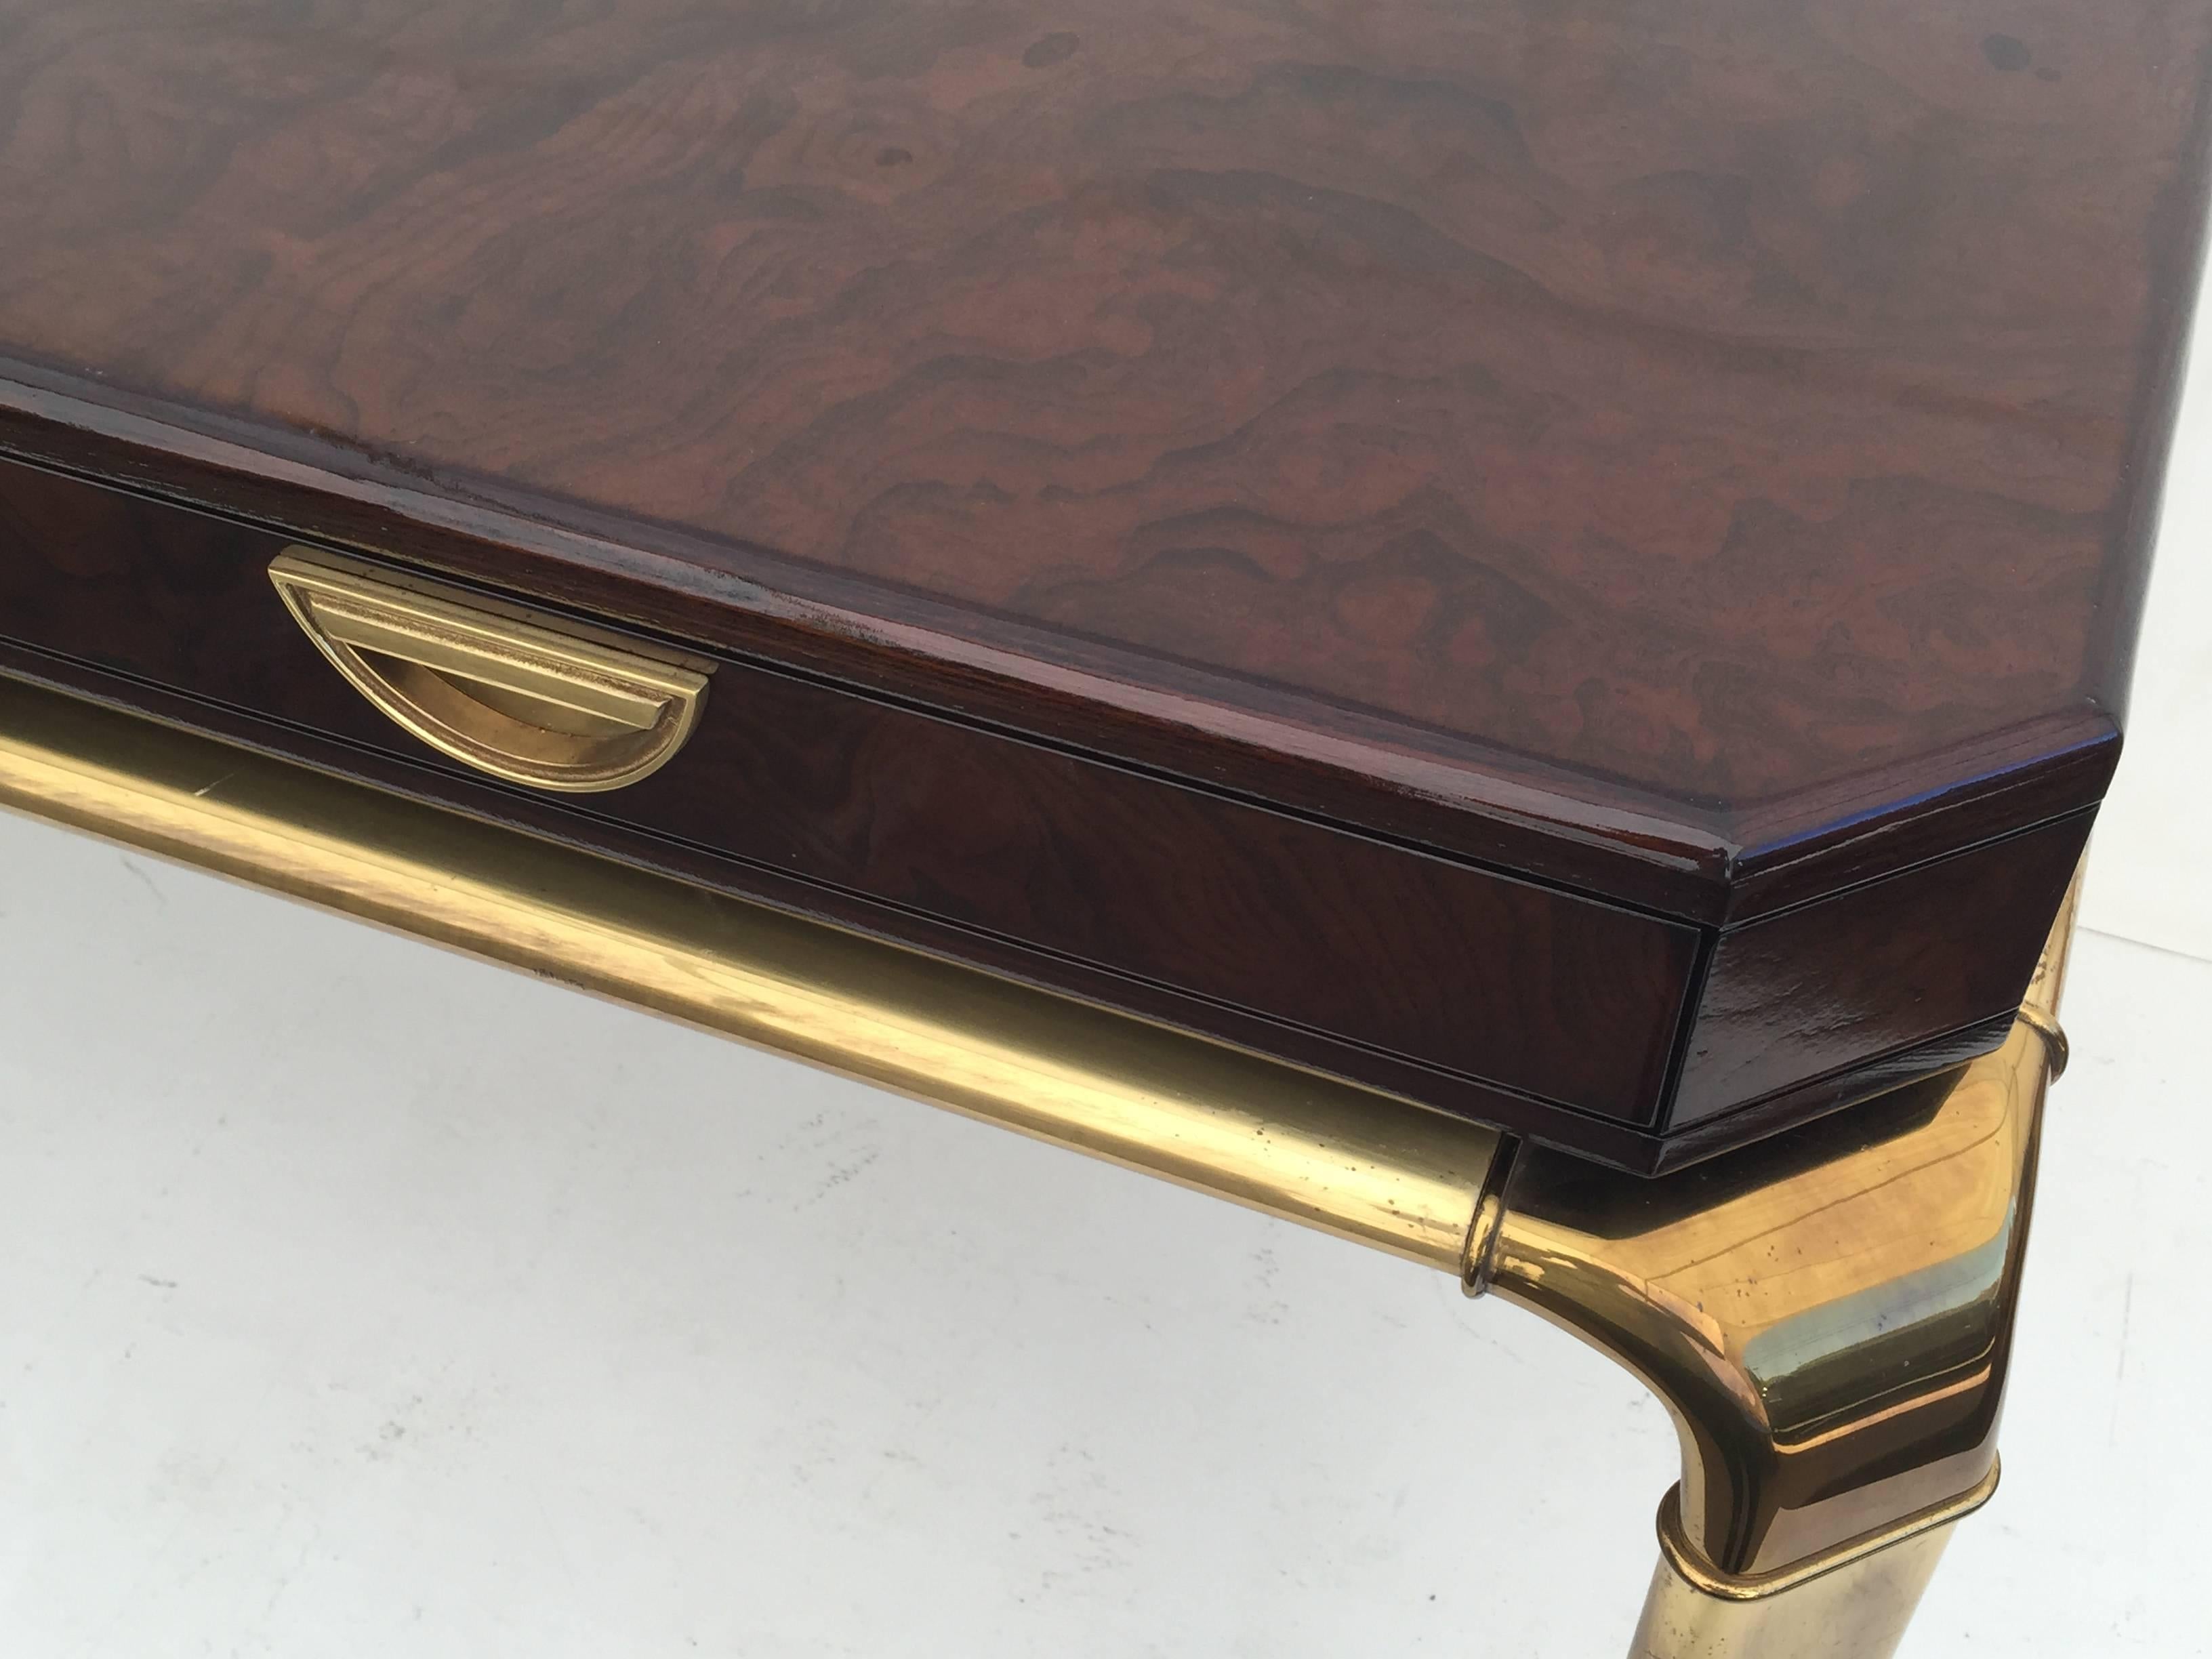 Lacquered Glamorous Brass and Burl Wood Desk by John Widdicomb